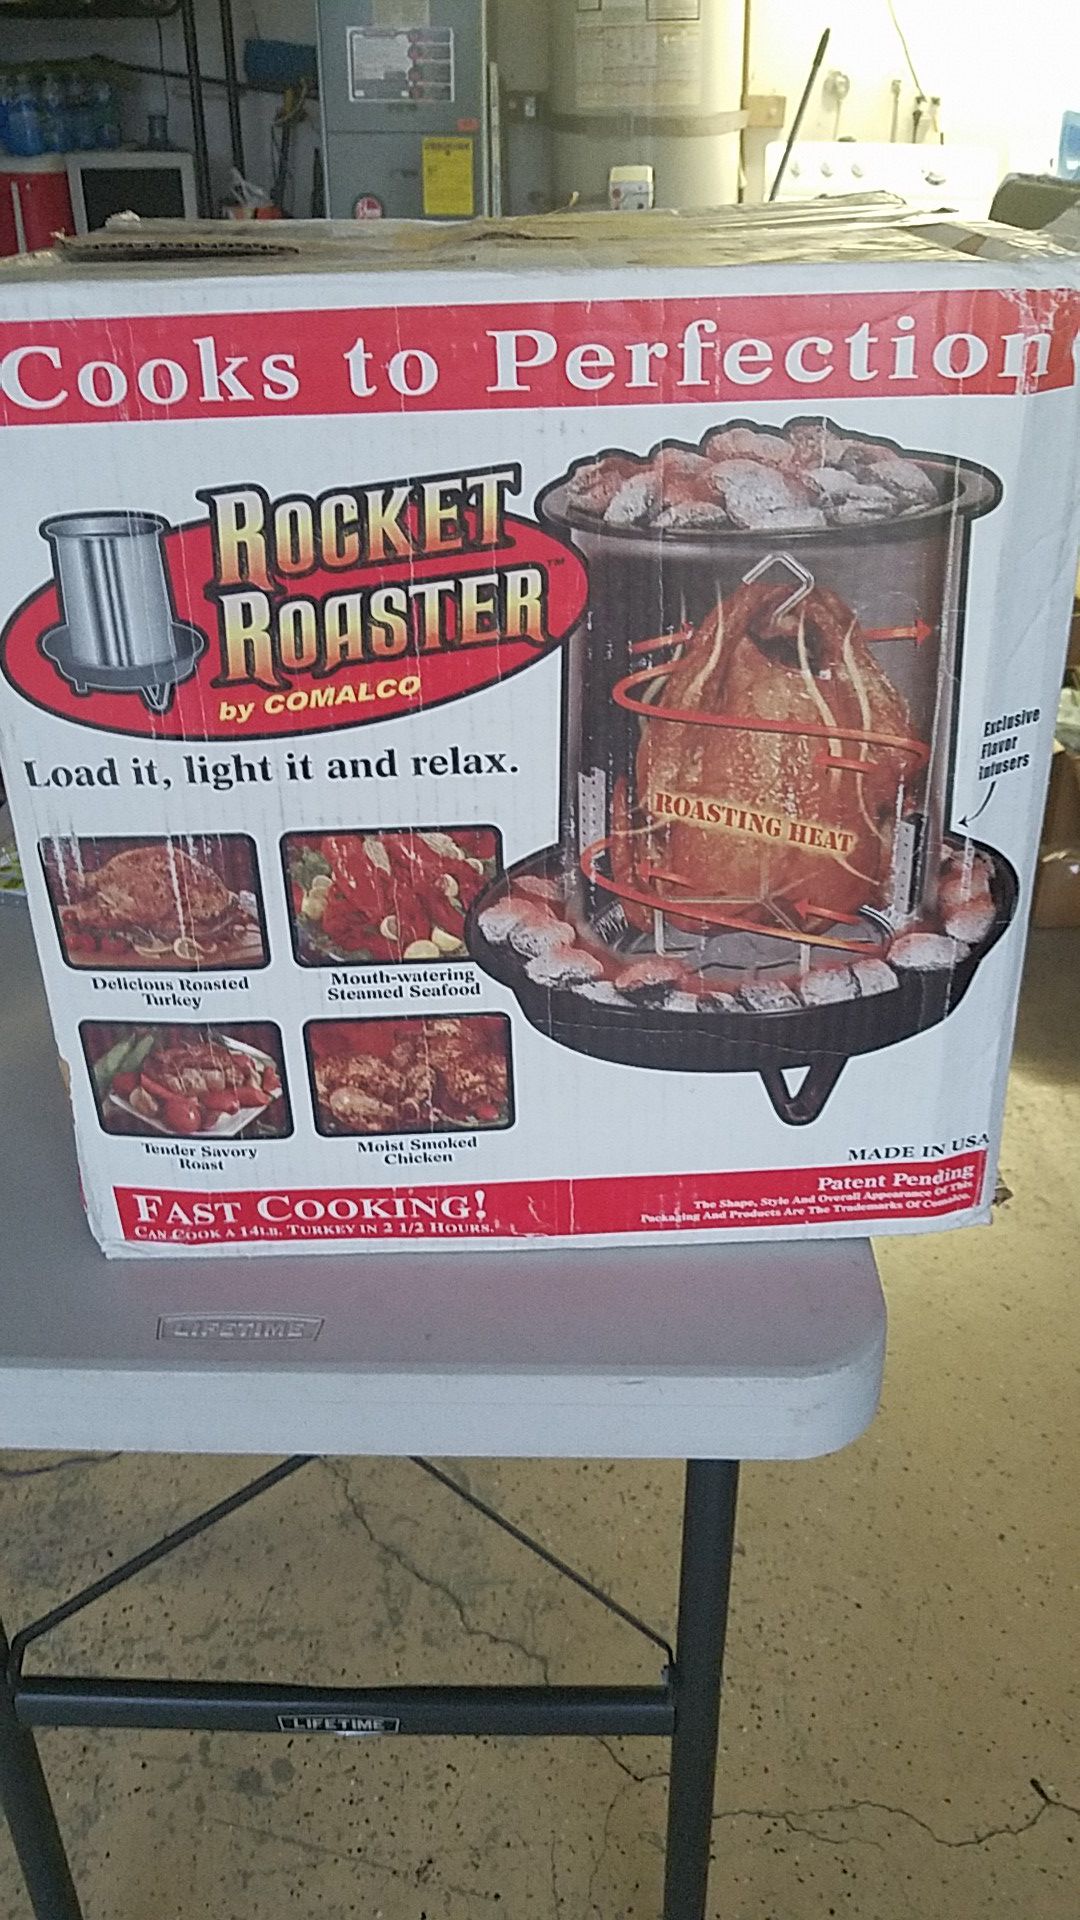 Nesco 12 quart convection air roaster for Sale in Long Beach, CA - OfferUp